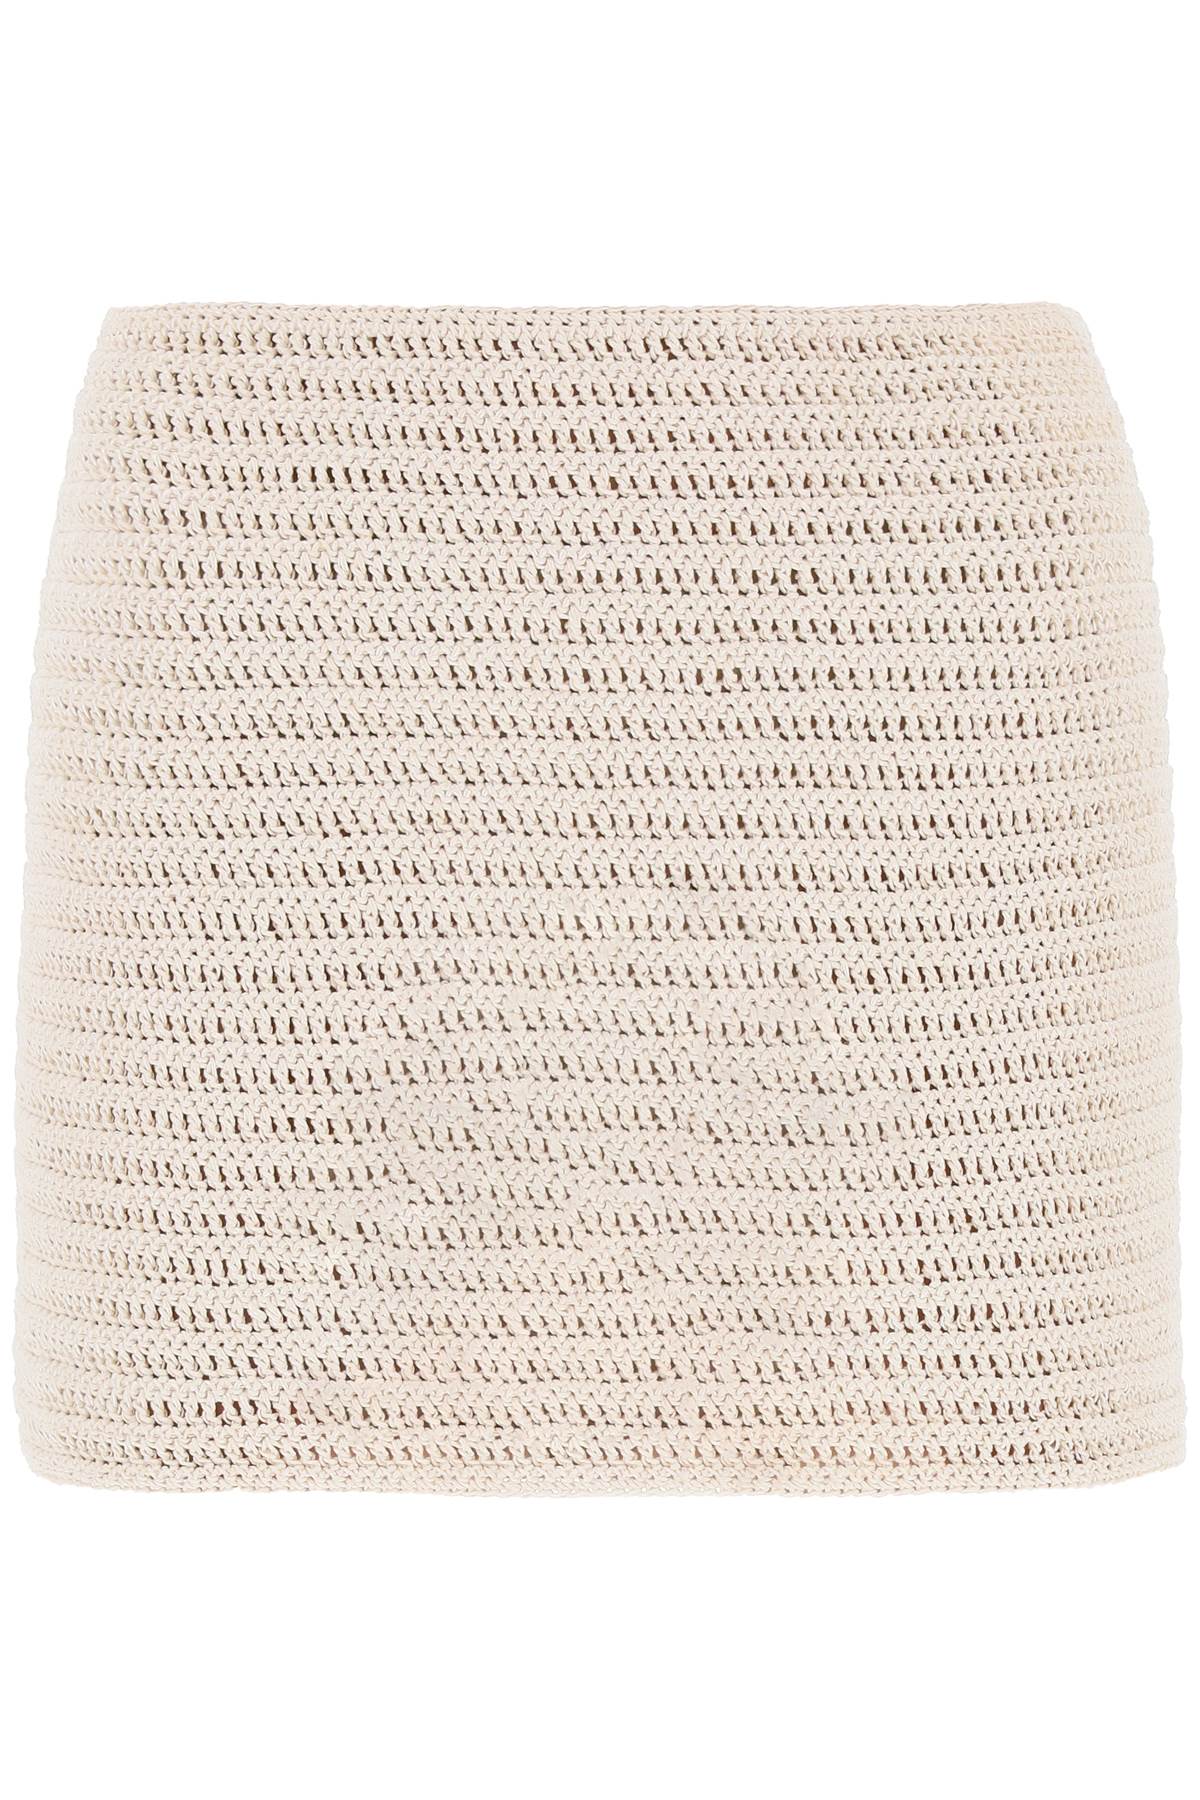 MAGDA BUTRYM Hand-Crafted Cotton and Viscose Crochet Mini Skirt in Mixed Colors